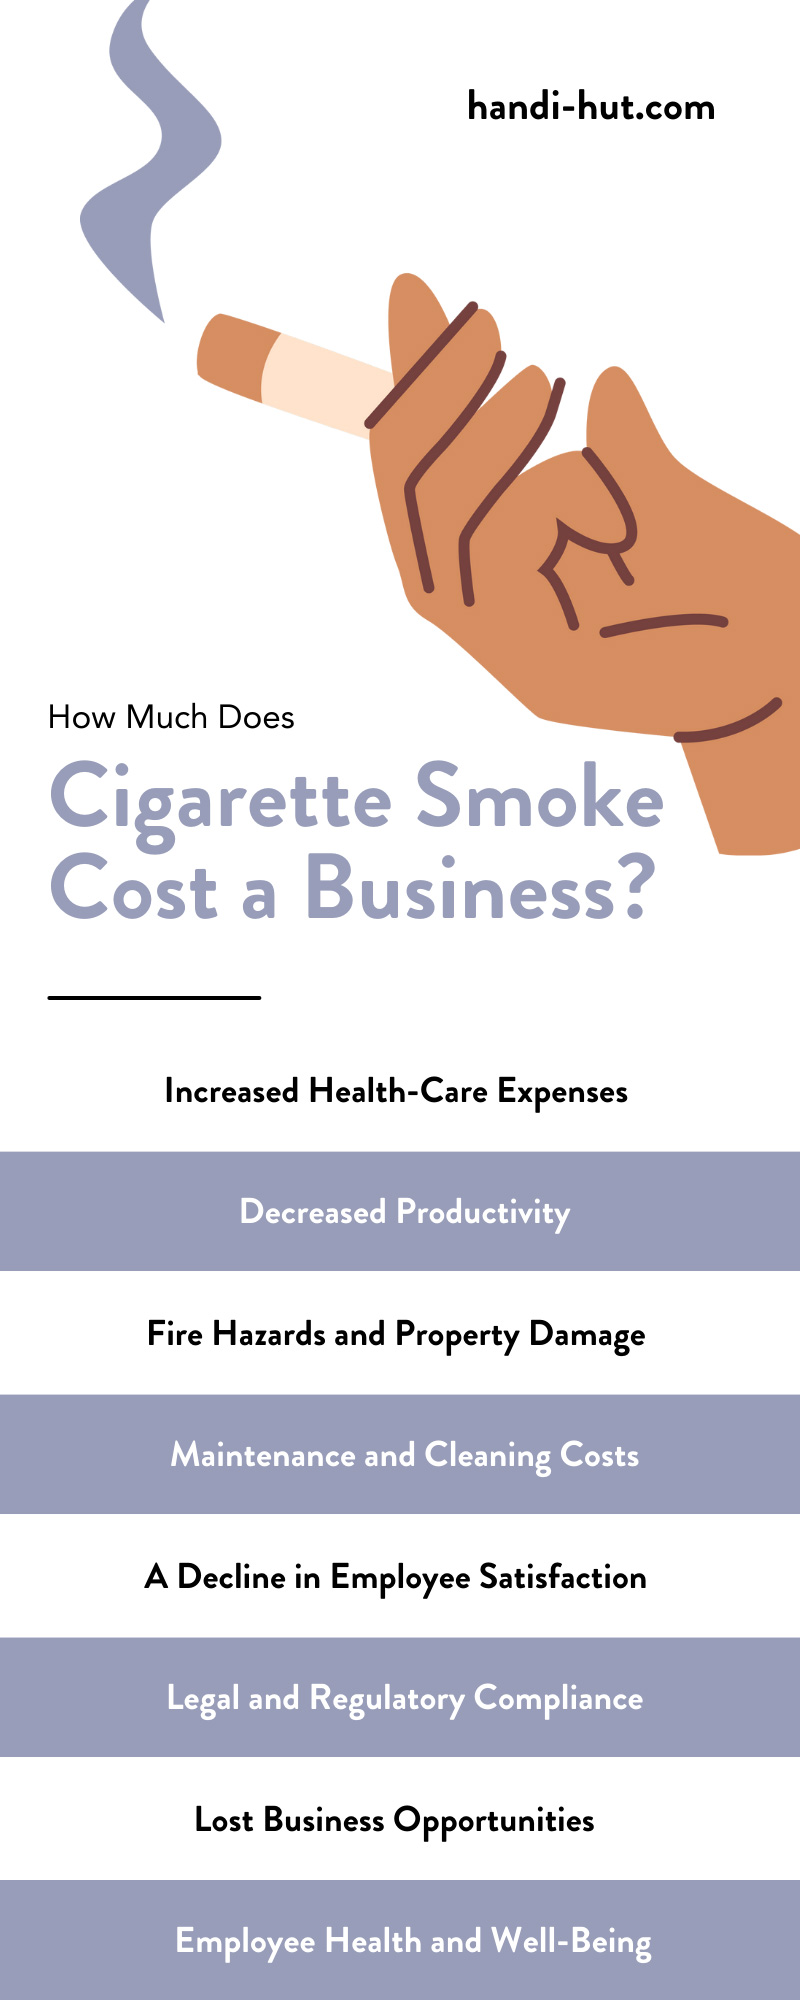 How Much Does Cigarette Smoke Cost a Business? 